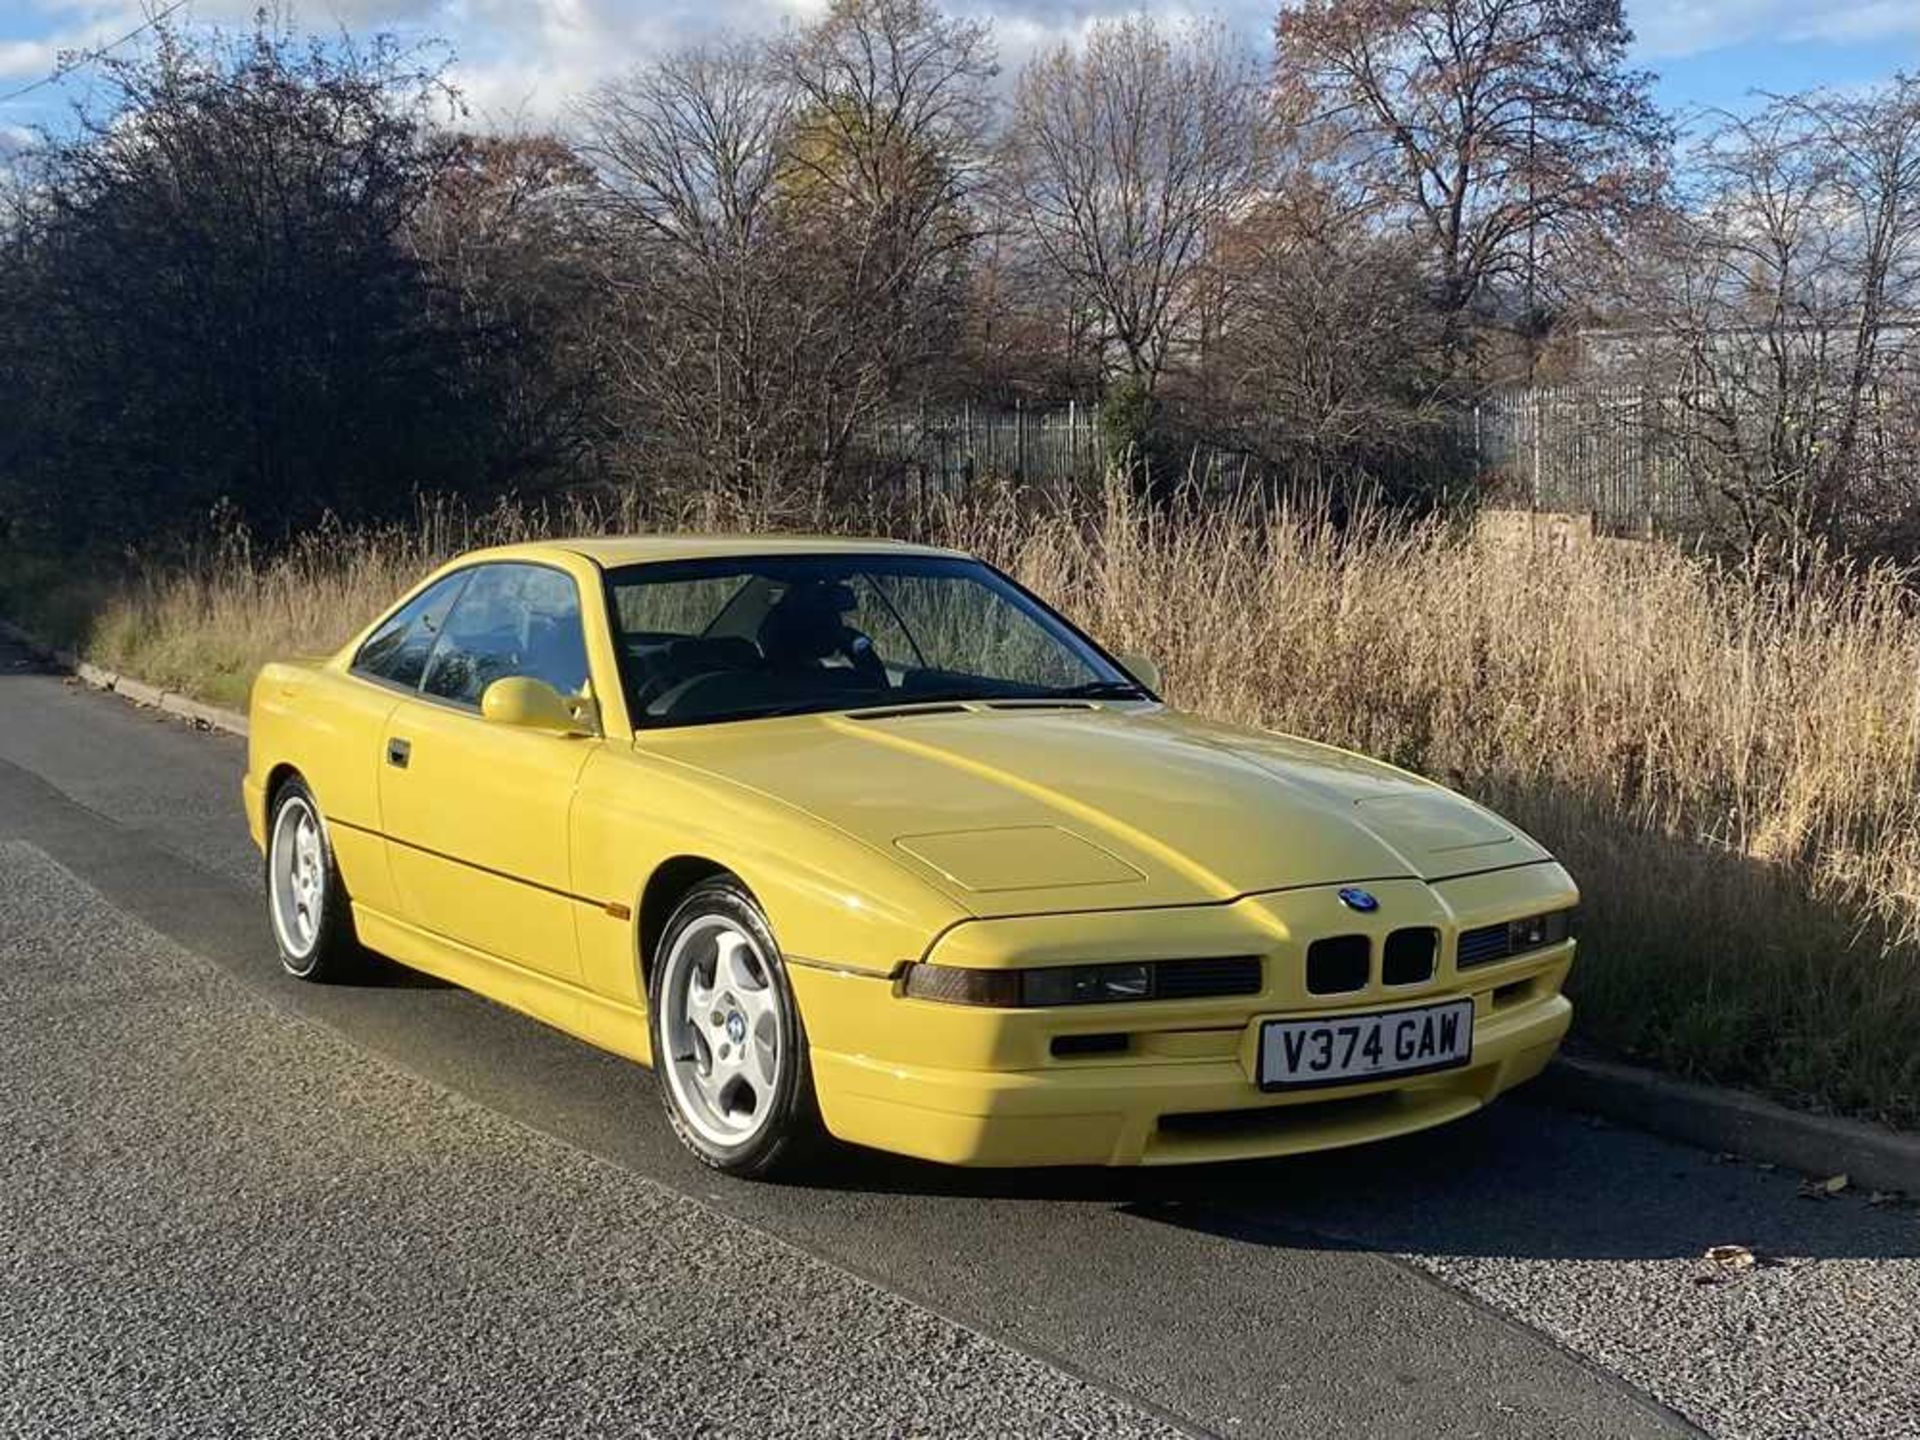 1997 BMW 840 CI Sport Understood to be 1 of just 38 finished in Dakar Yellow II - Image 9 of 79